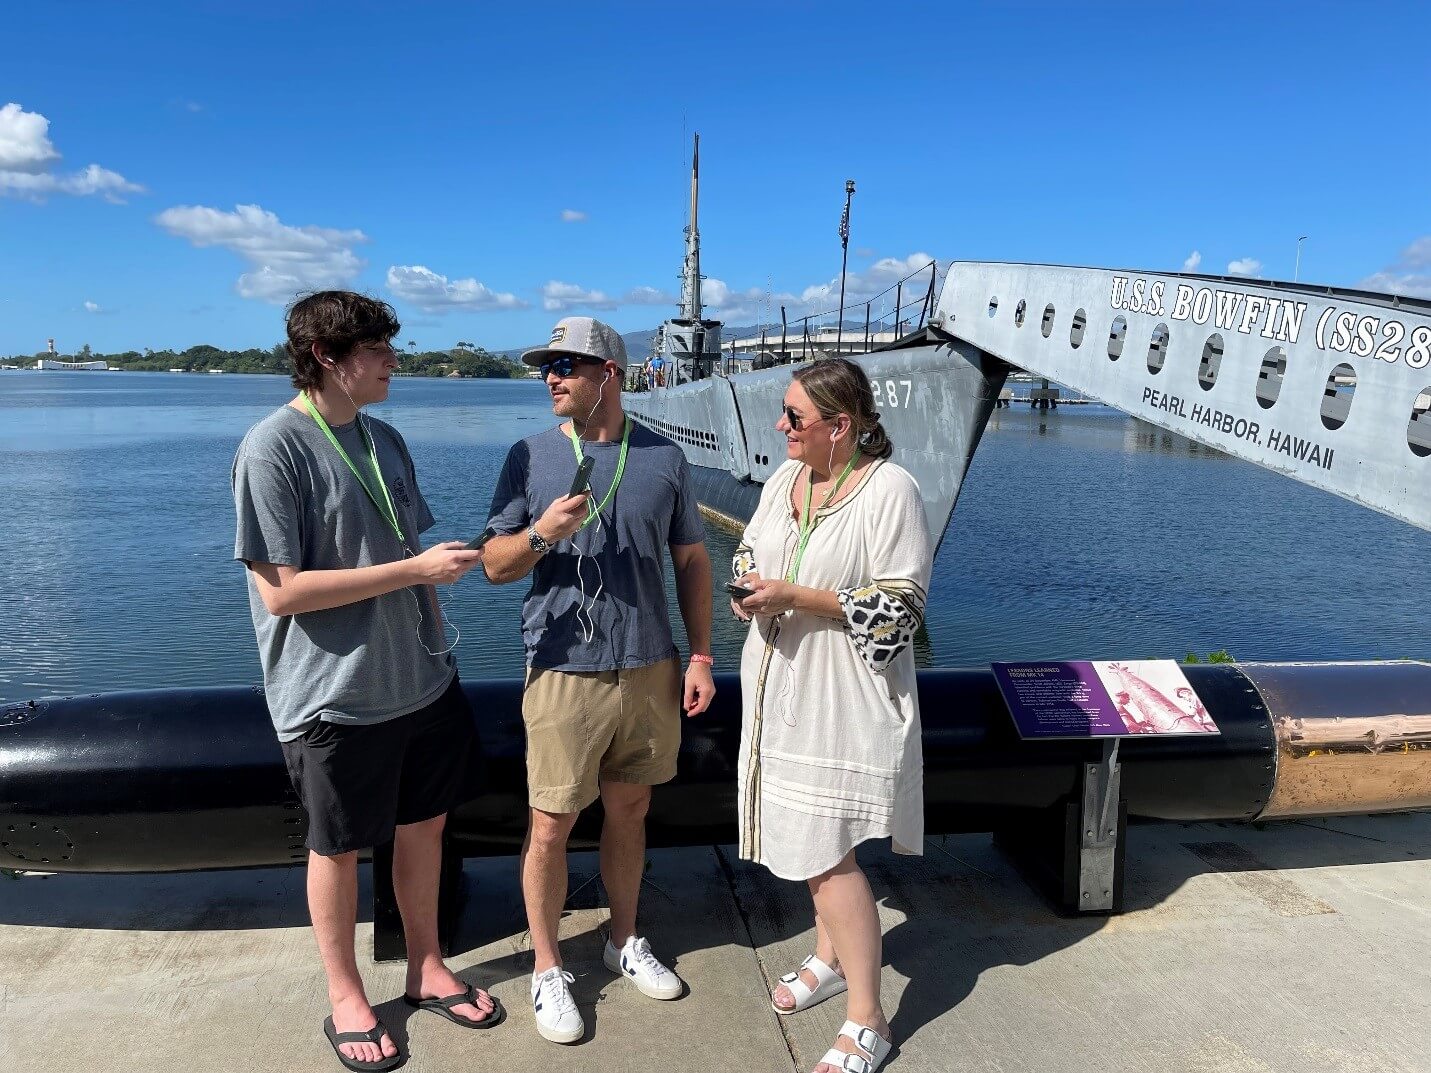 Pacific Fleet Submarine Museum and USS Bowfin